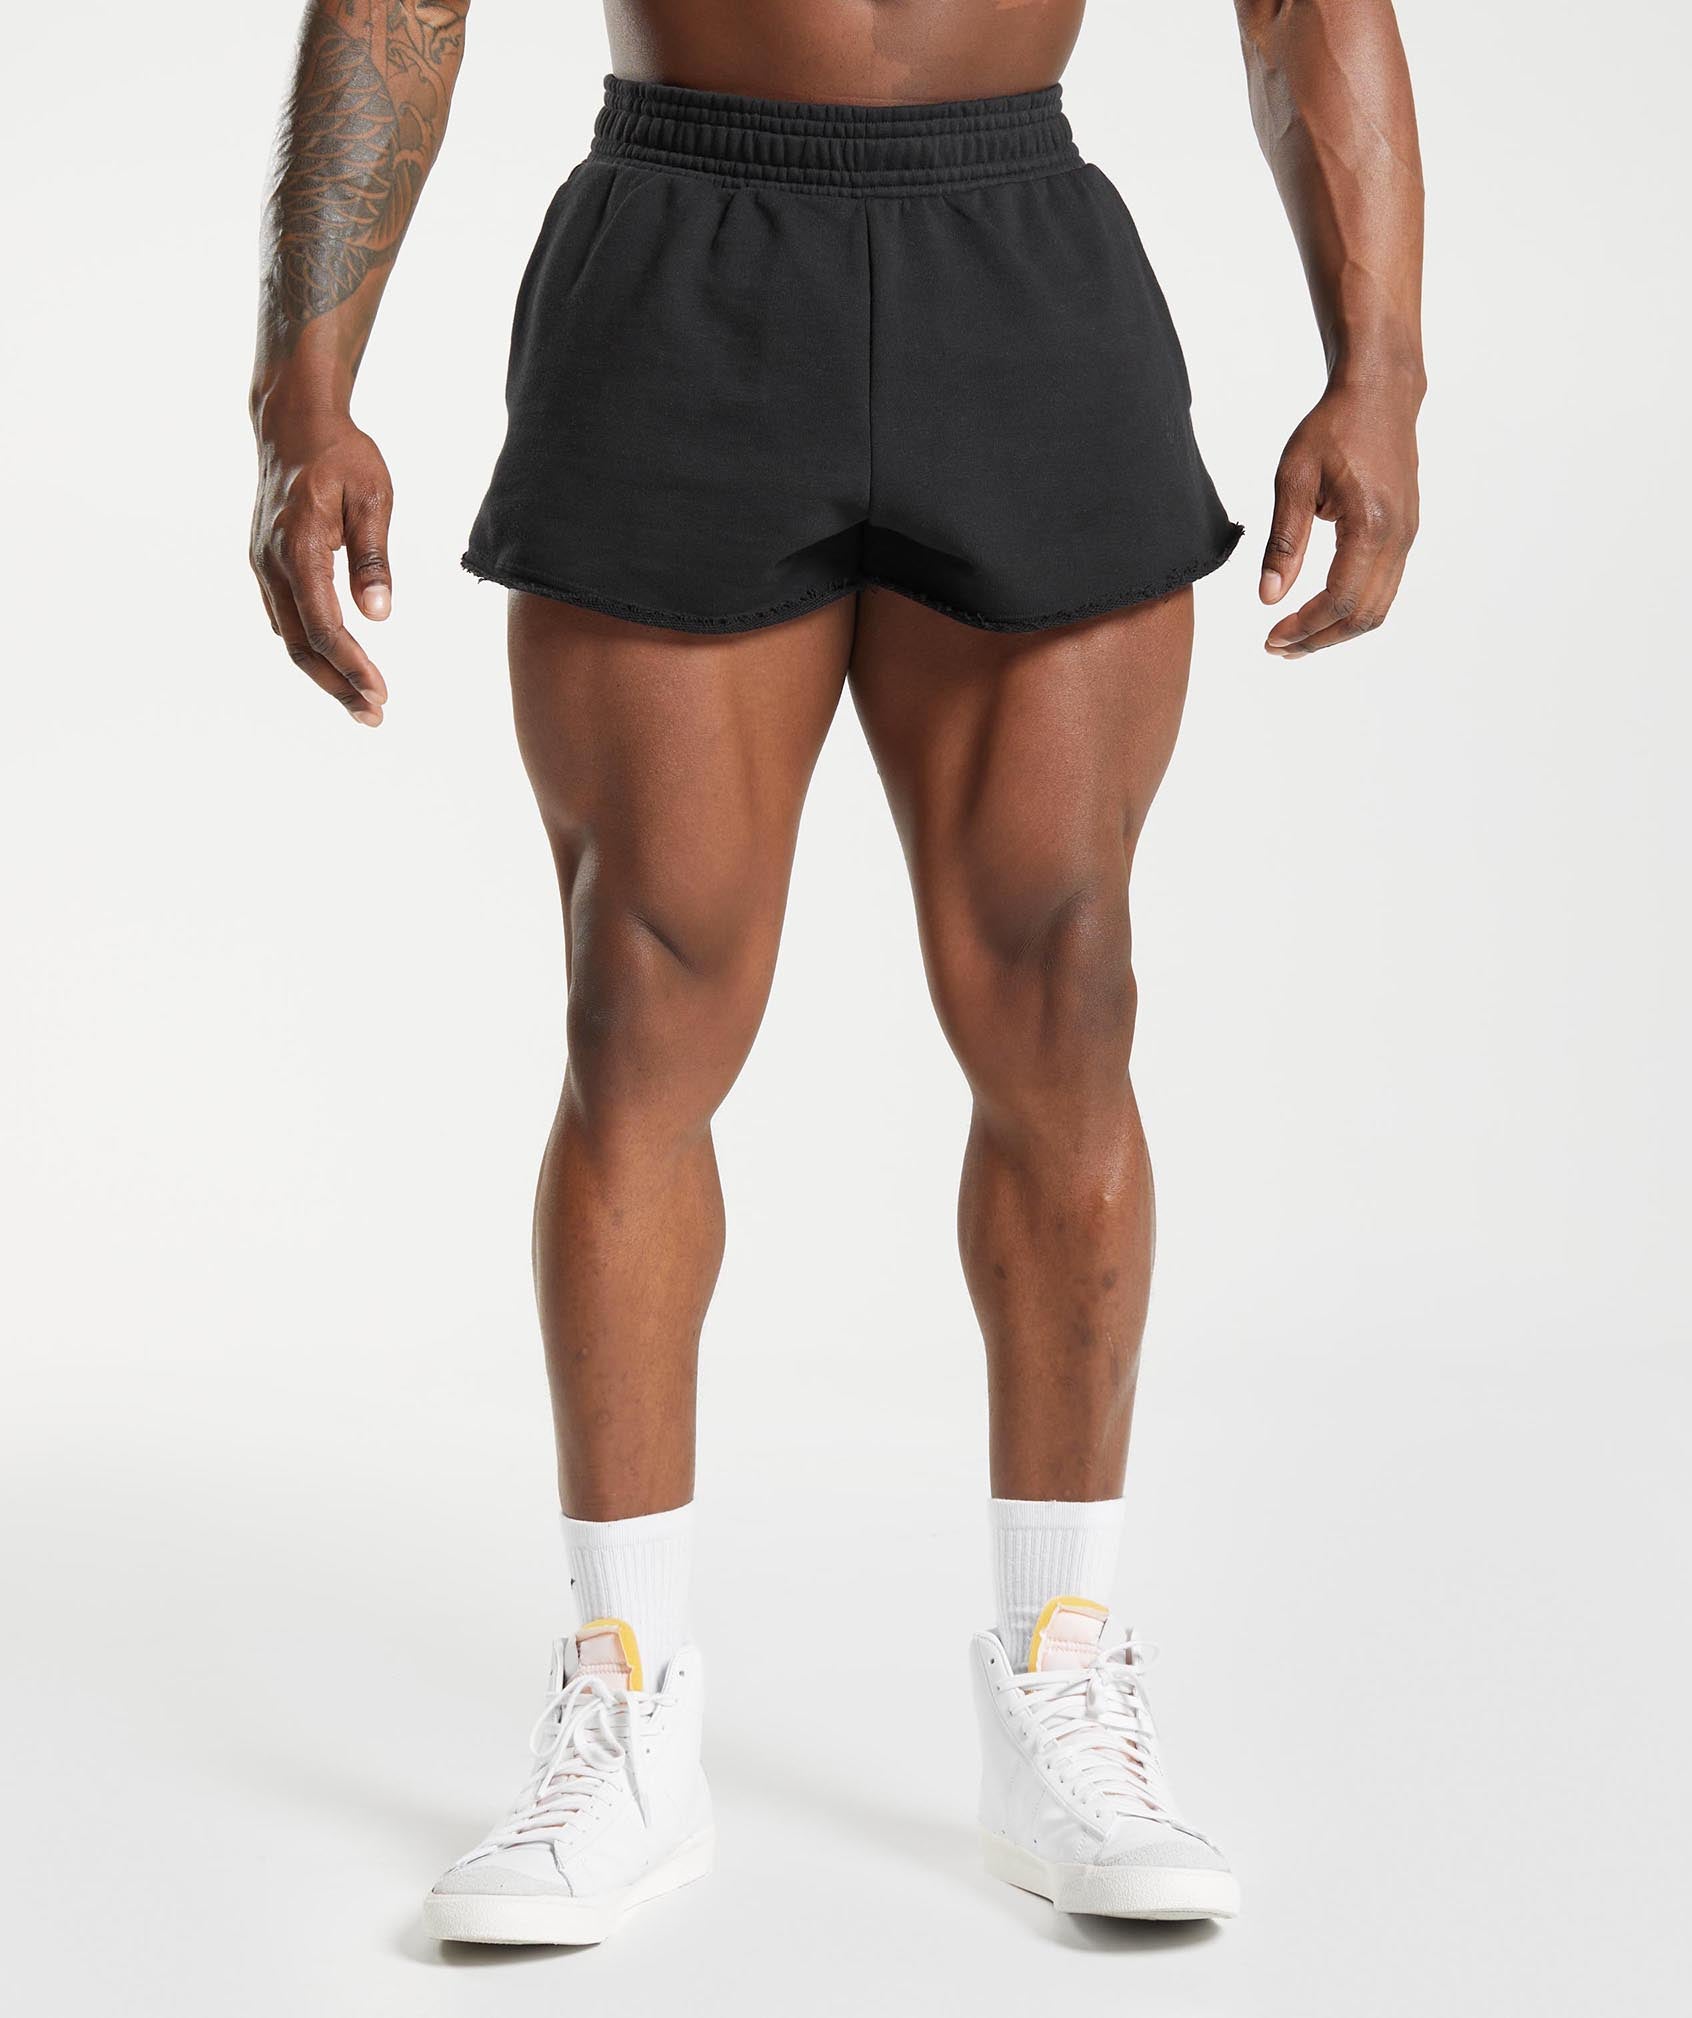 discounts deals on sale ISO!!!!! Gymshark Legacy Shorts in Light Gray